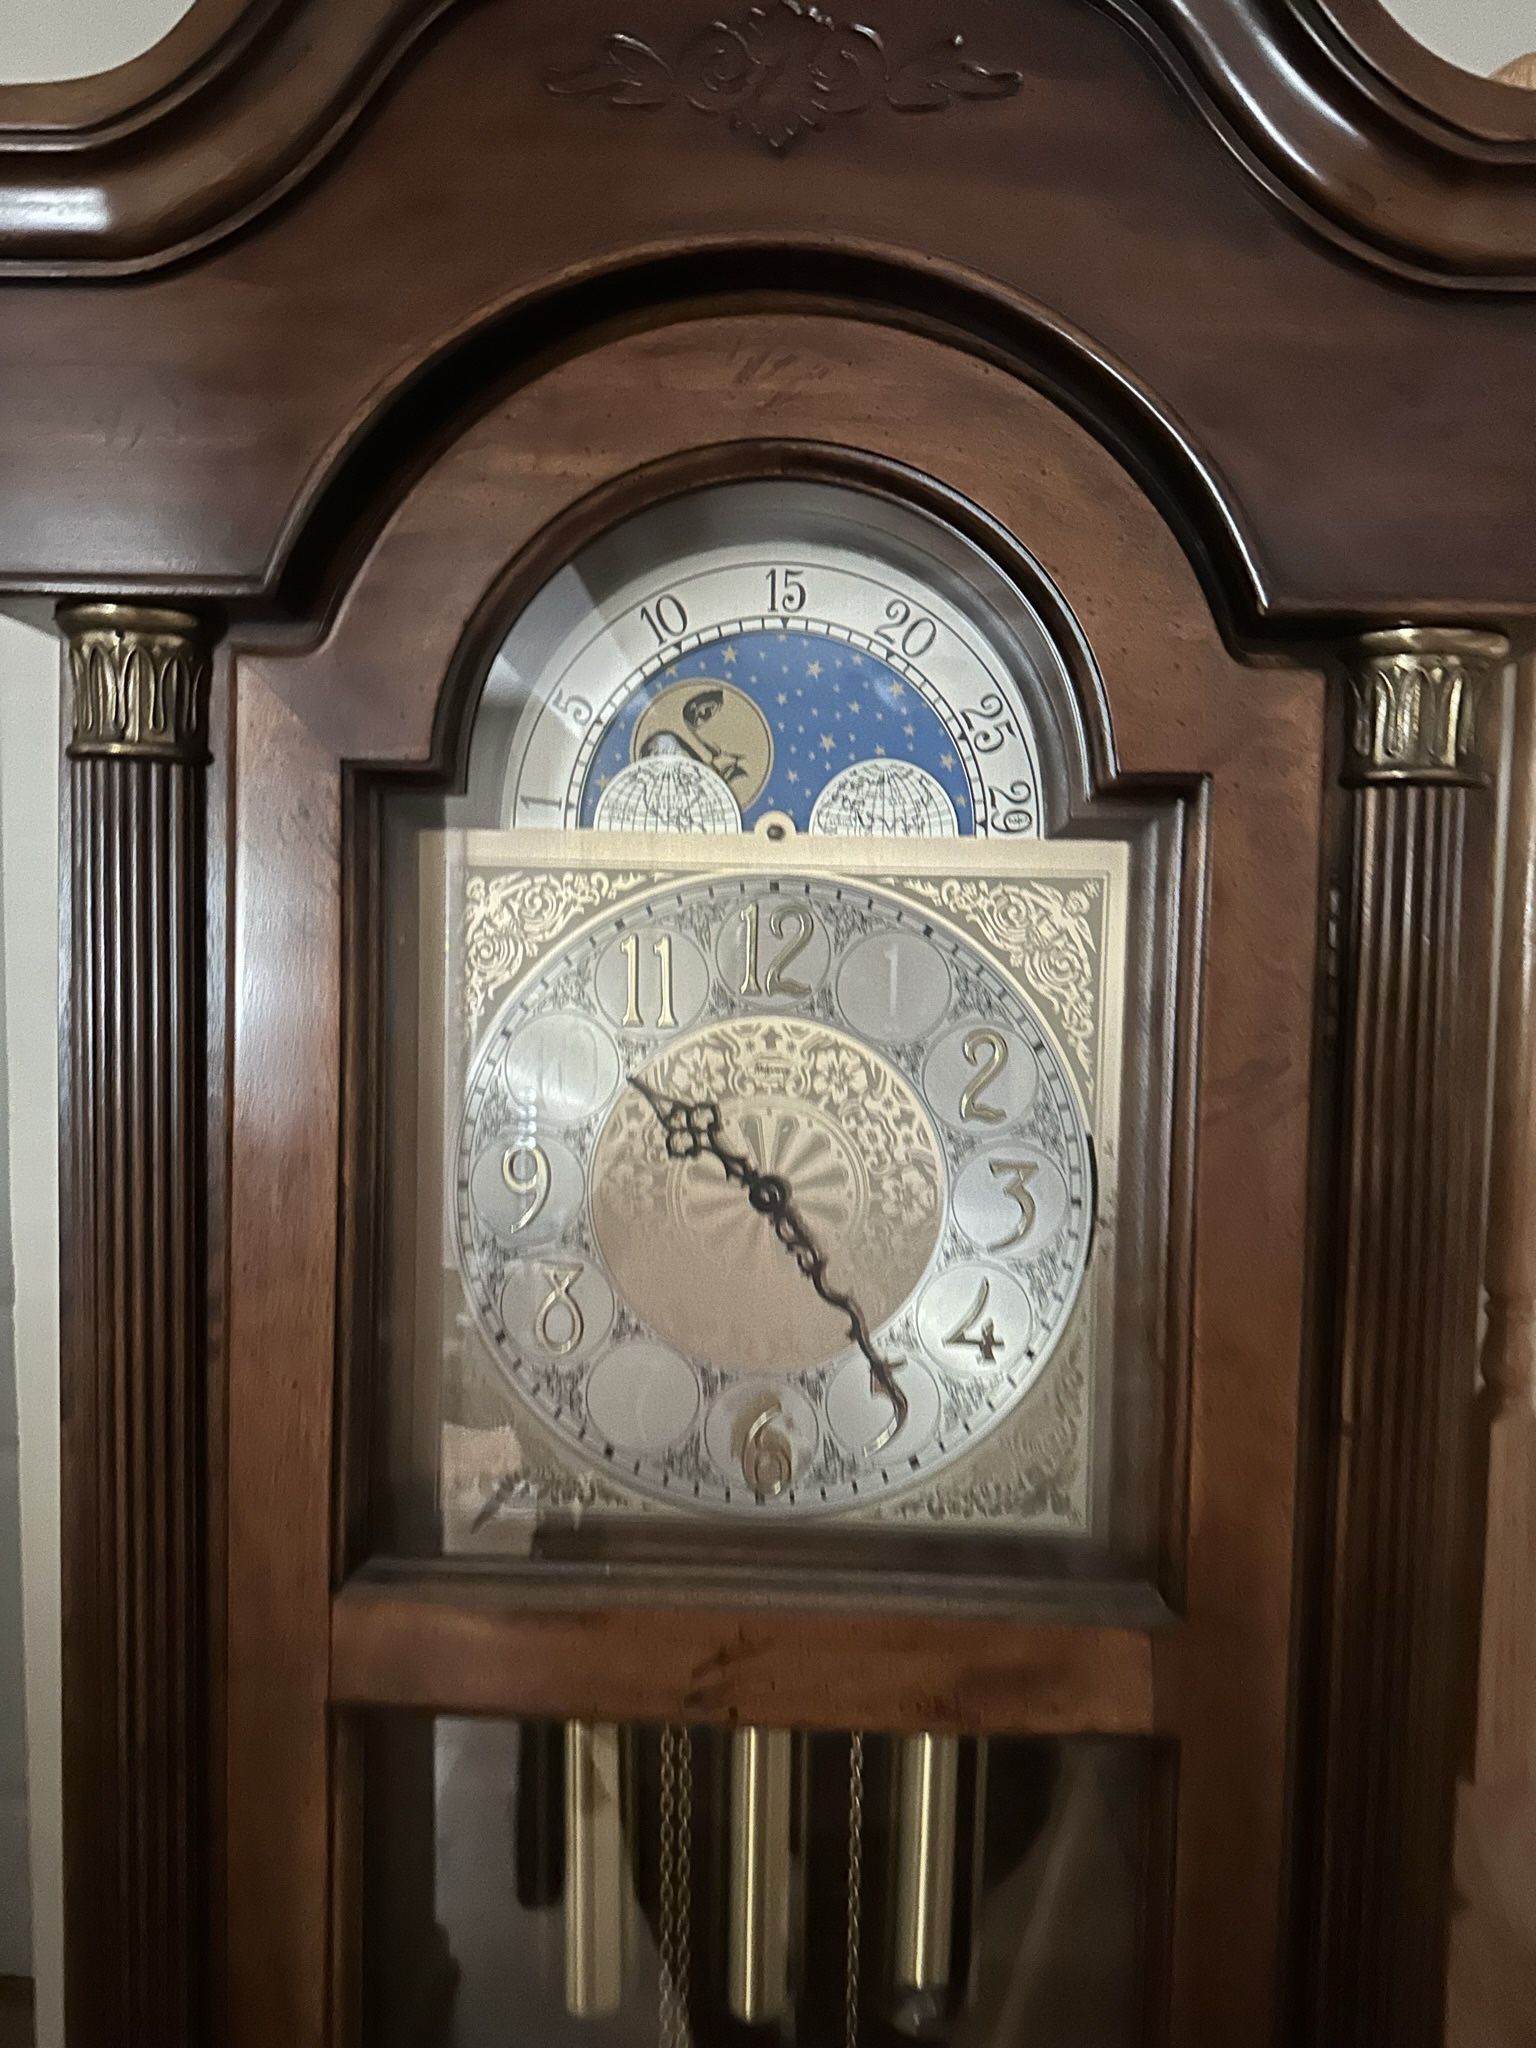 $190 If Can Come This Weekend Ridgeway Grandfather  Clock  Moon  Sun  Model W2 205 Cherry Finish Movement 